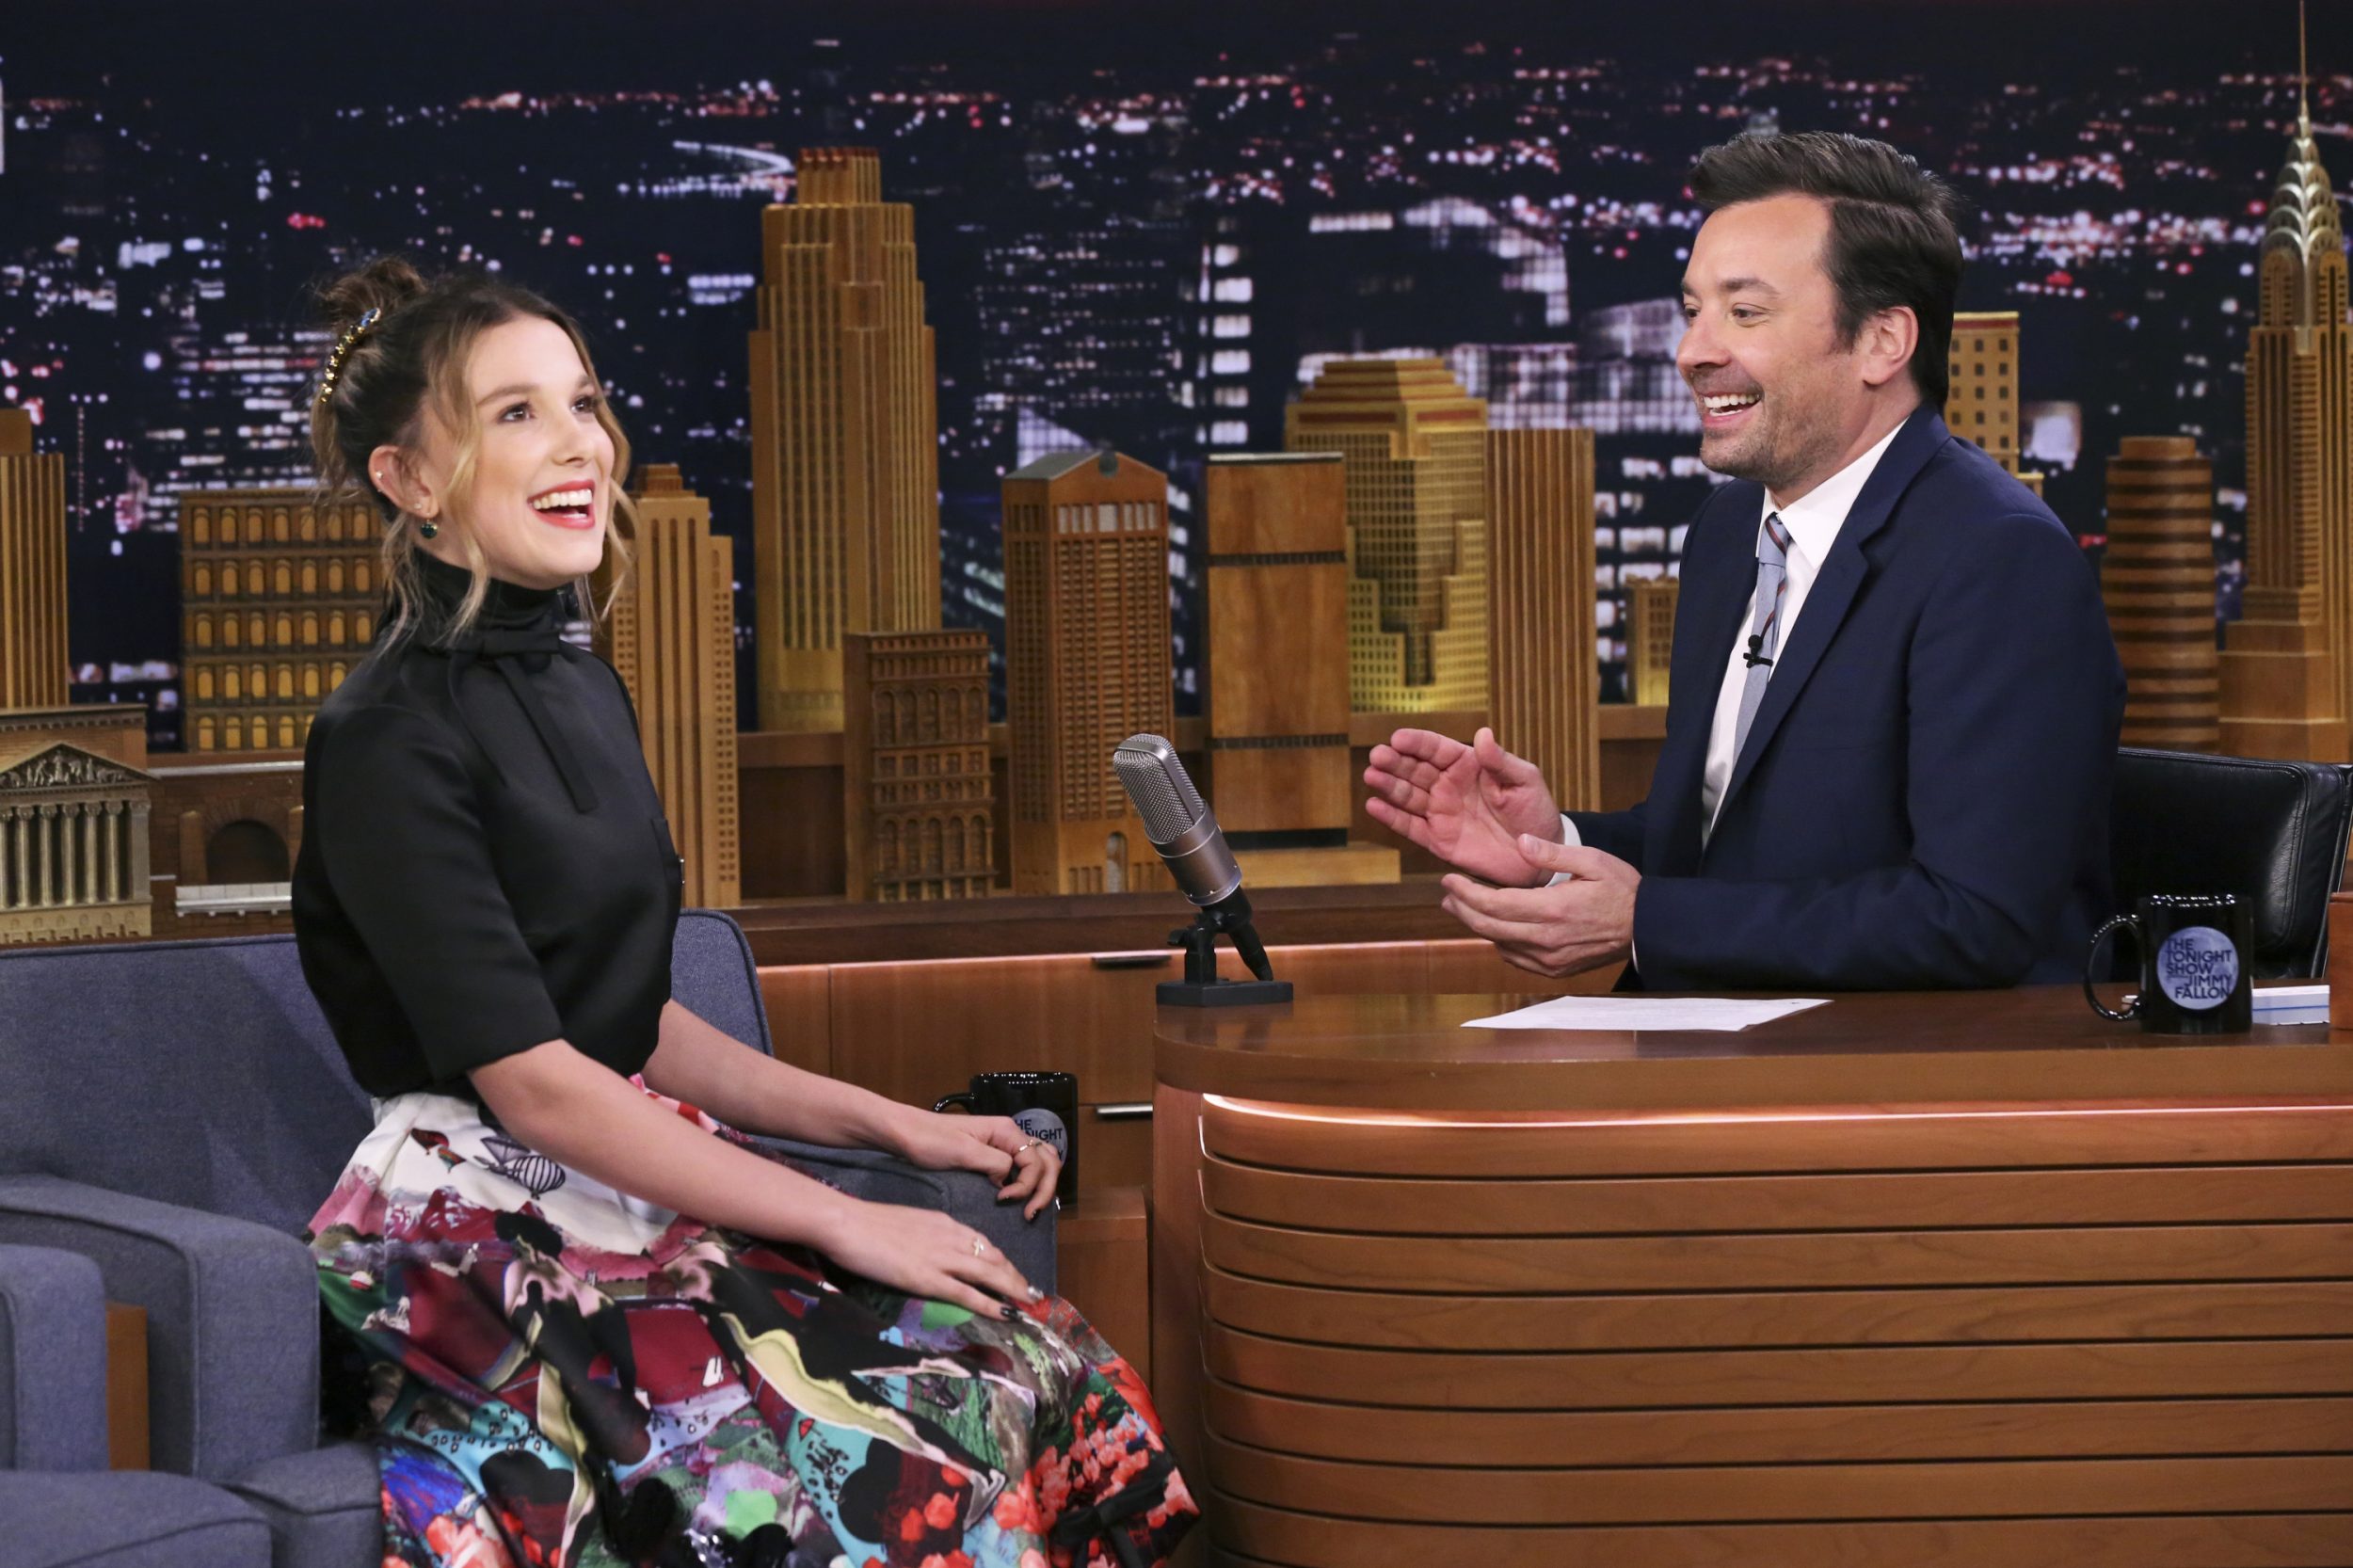 JIMMY FALLON - Episode 1074 - Pictured: (l-r) Actress Millie Bobby Brown du...